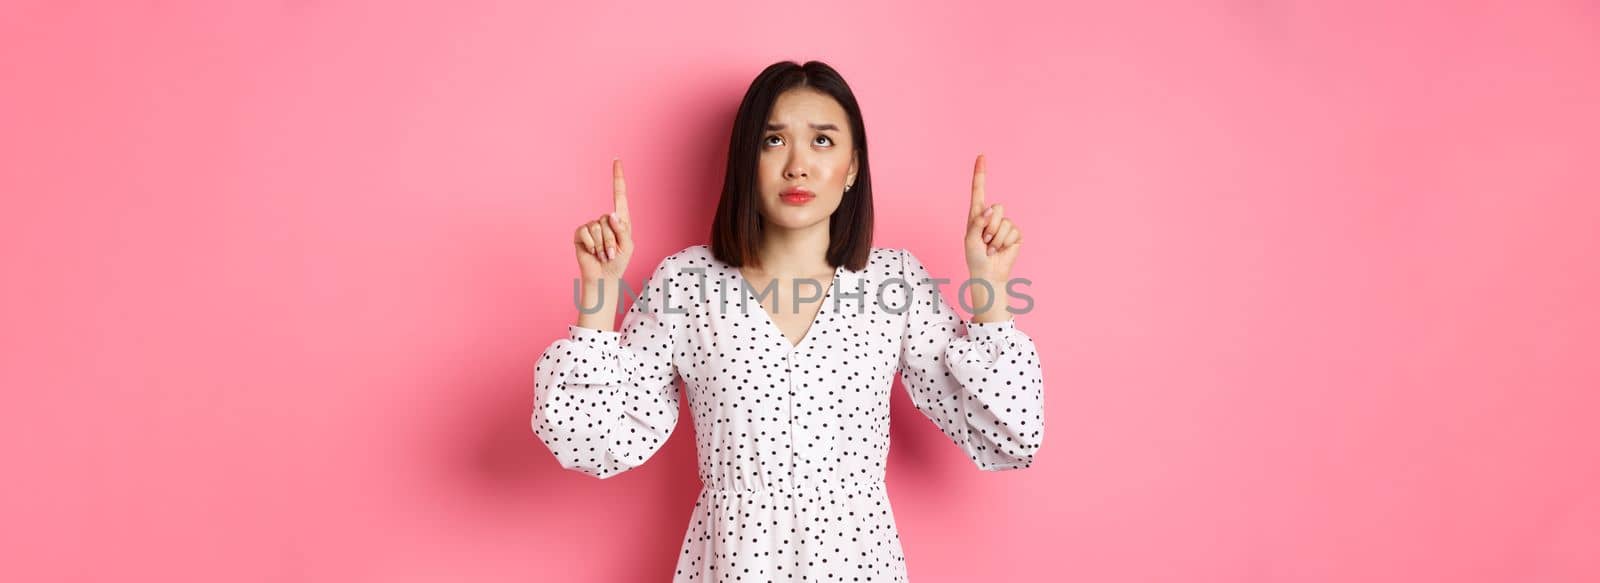 Worried and concerned asian girl in cute dress frowning, pointing and looking up with sad face, standing over pink background. Copy space